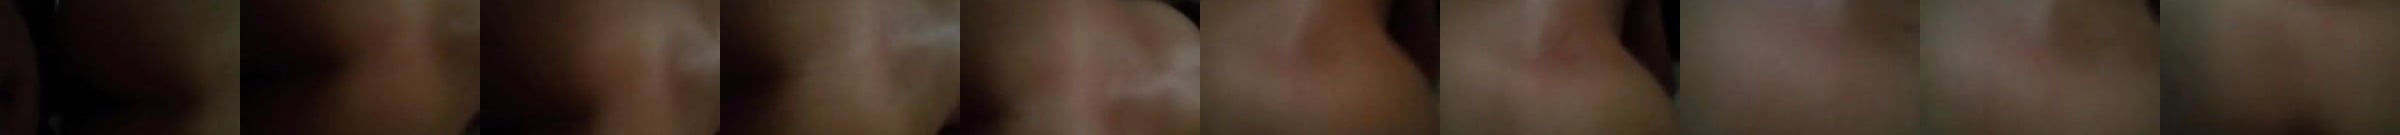 Squishy Hmong Puss Sex Just Hear The Grool Free Porn 82